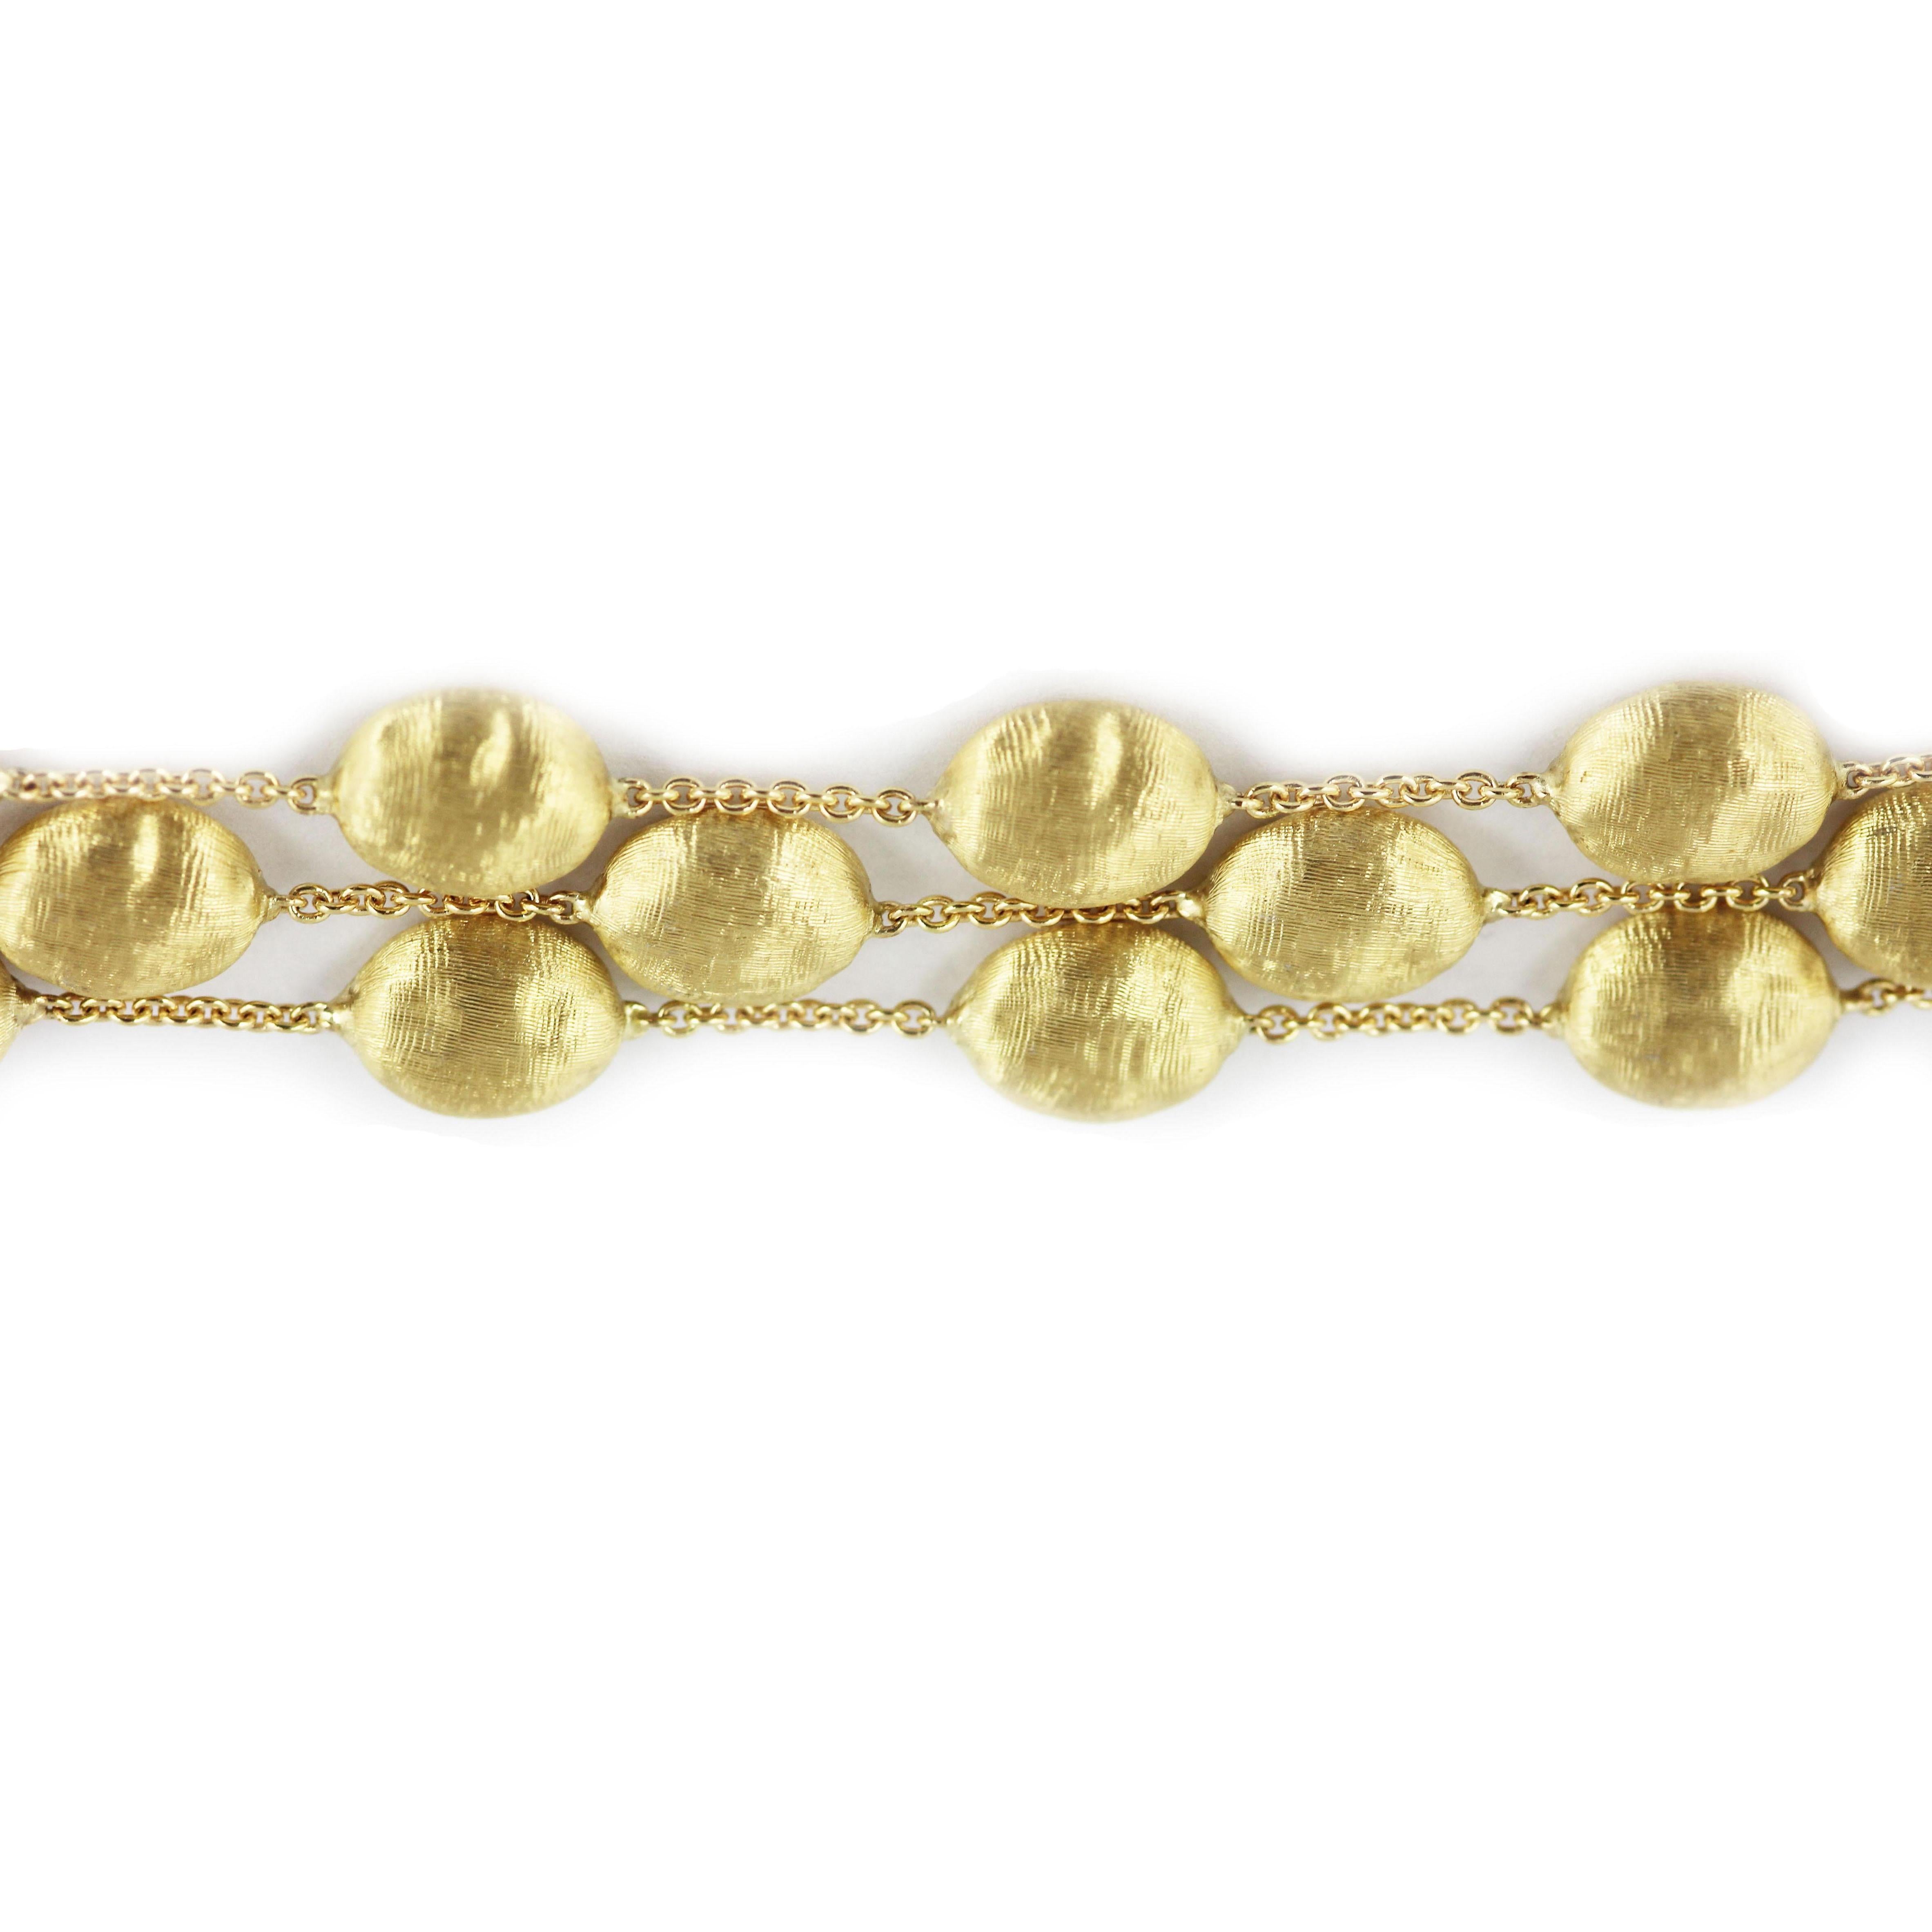 Marco Bicego Siviglia 18ct Yellow Gold 3 strand Bracelet.
New retail price approximate £2,220
The Marco Bicego Siviglia collection is inspired by the beautiful and exotic cobblestone streets of Seville in Spain. The collection features pieces with